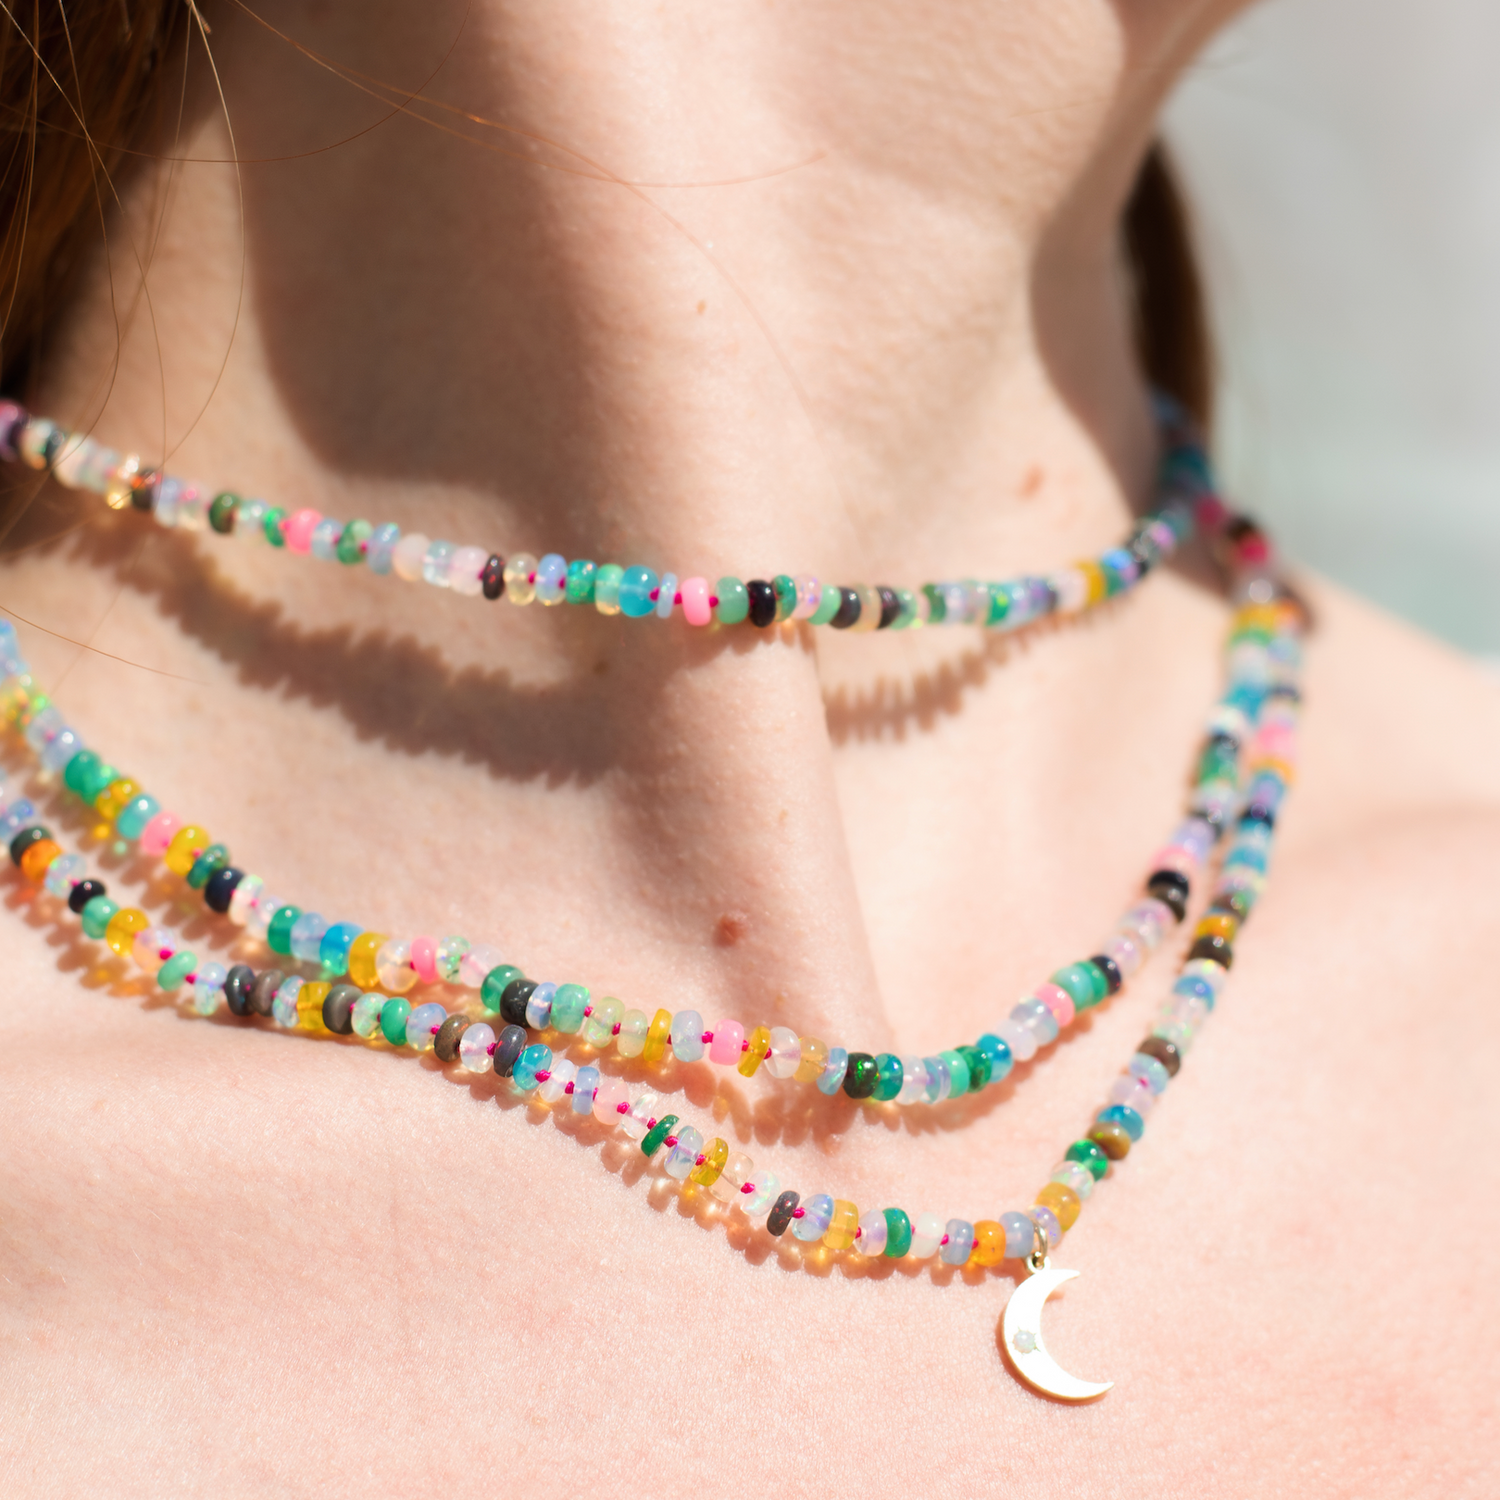 Rainbow Bead Necklace: How To Make A Beaded Necklace